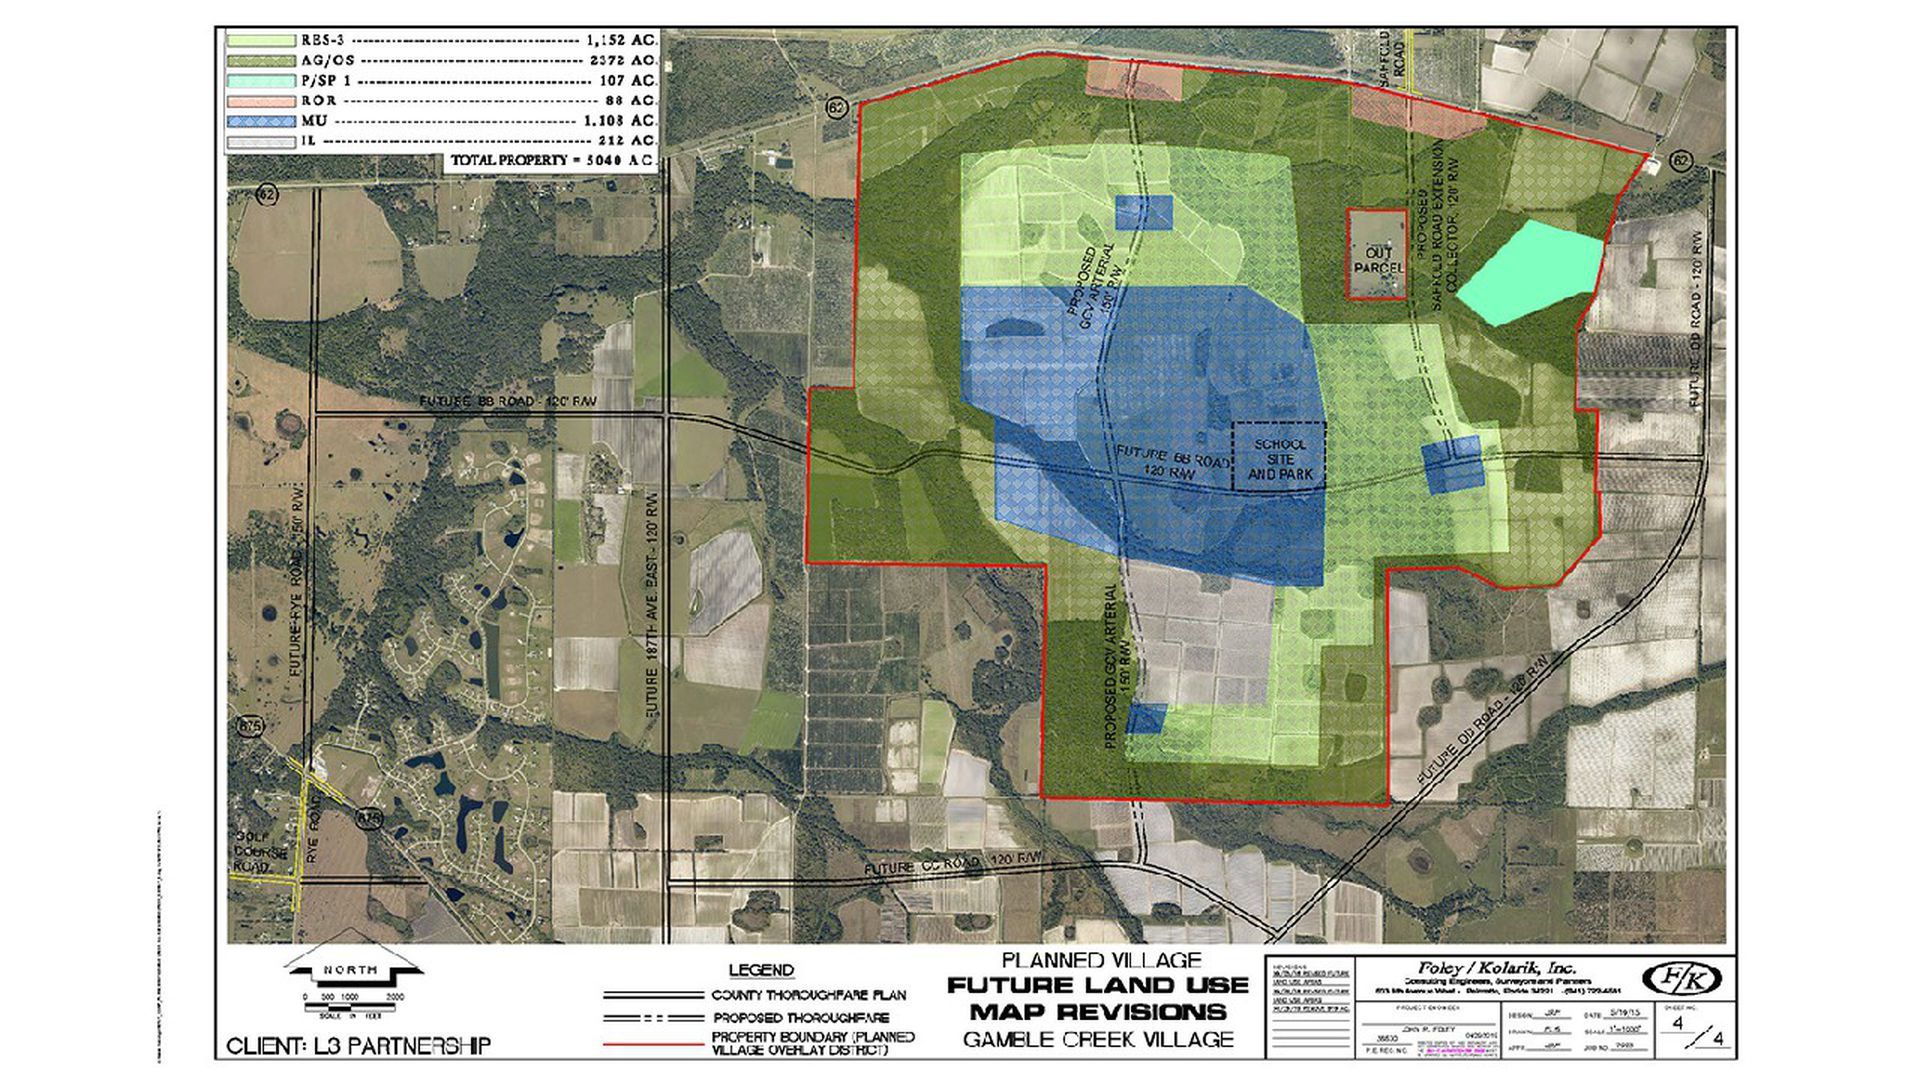 A map showing the plans for Gamble Creek Village in eastern Manatee County